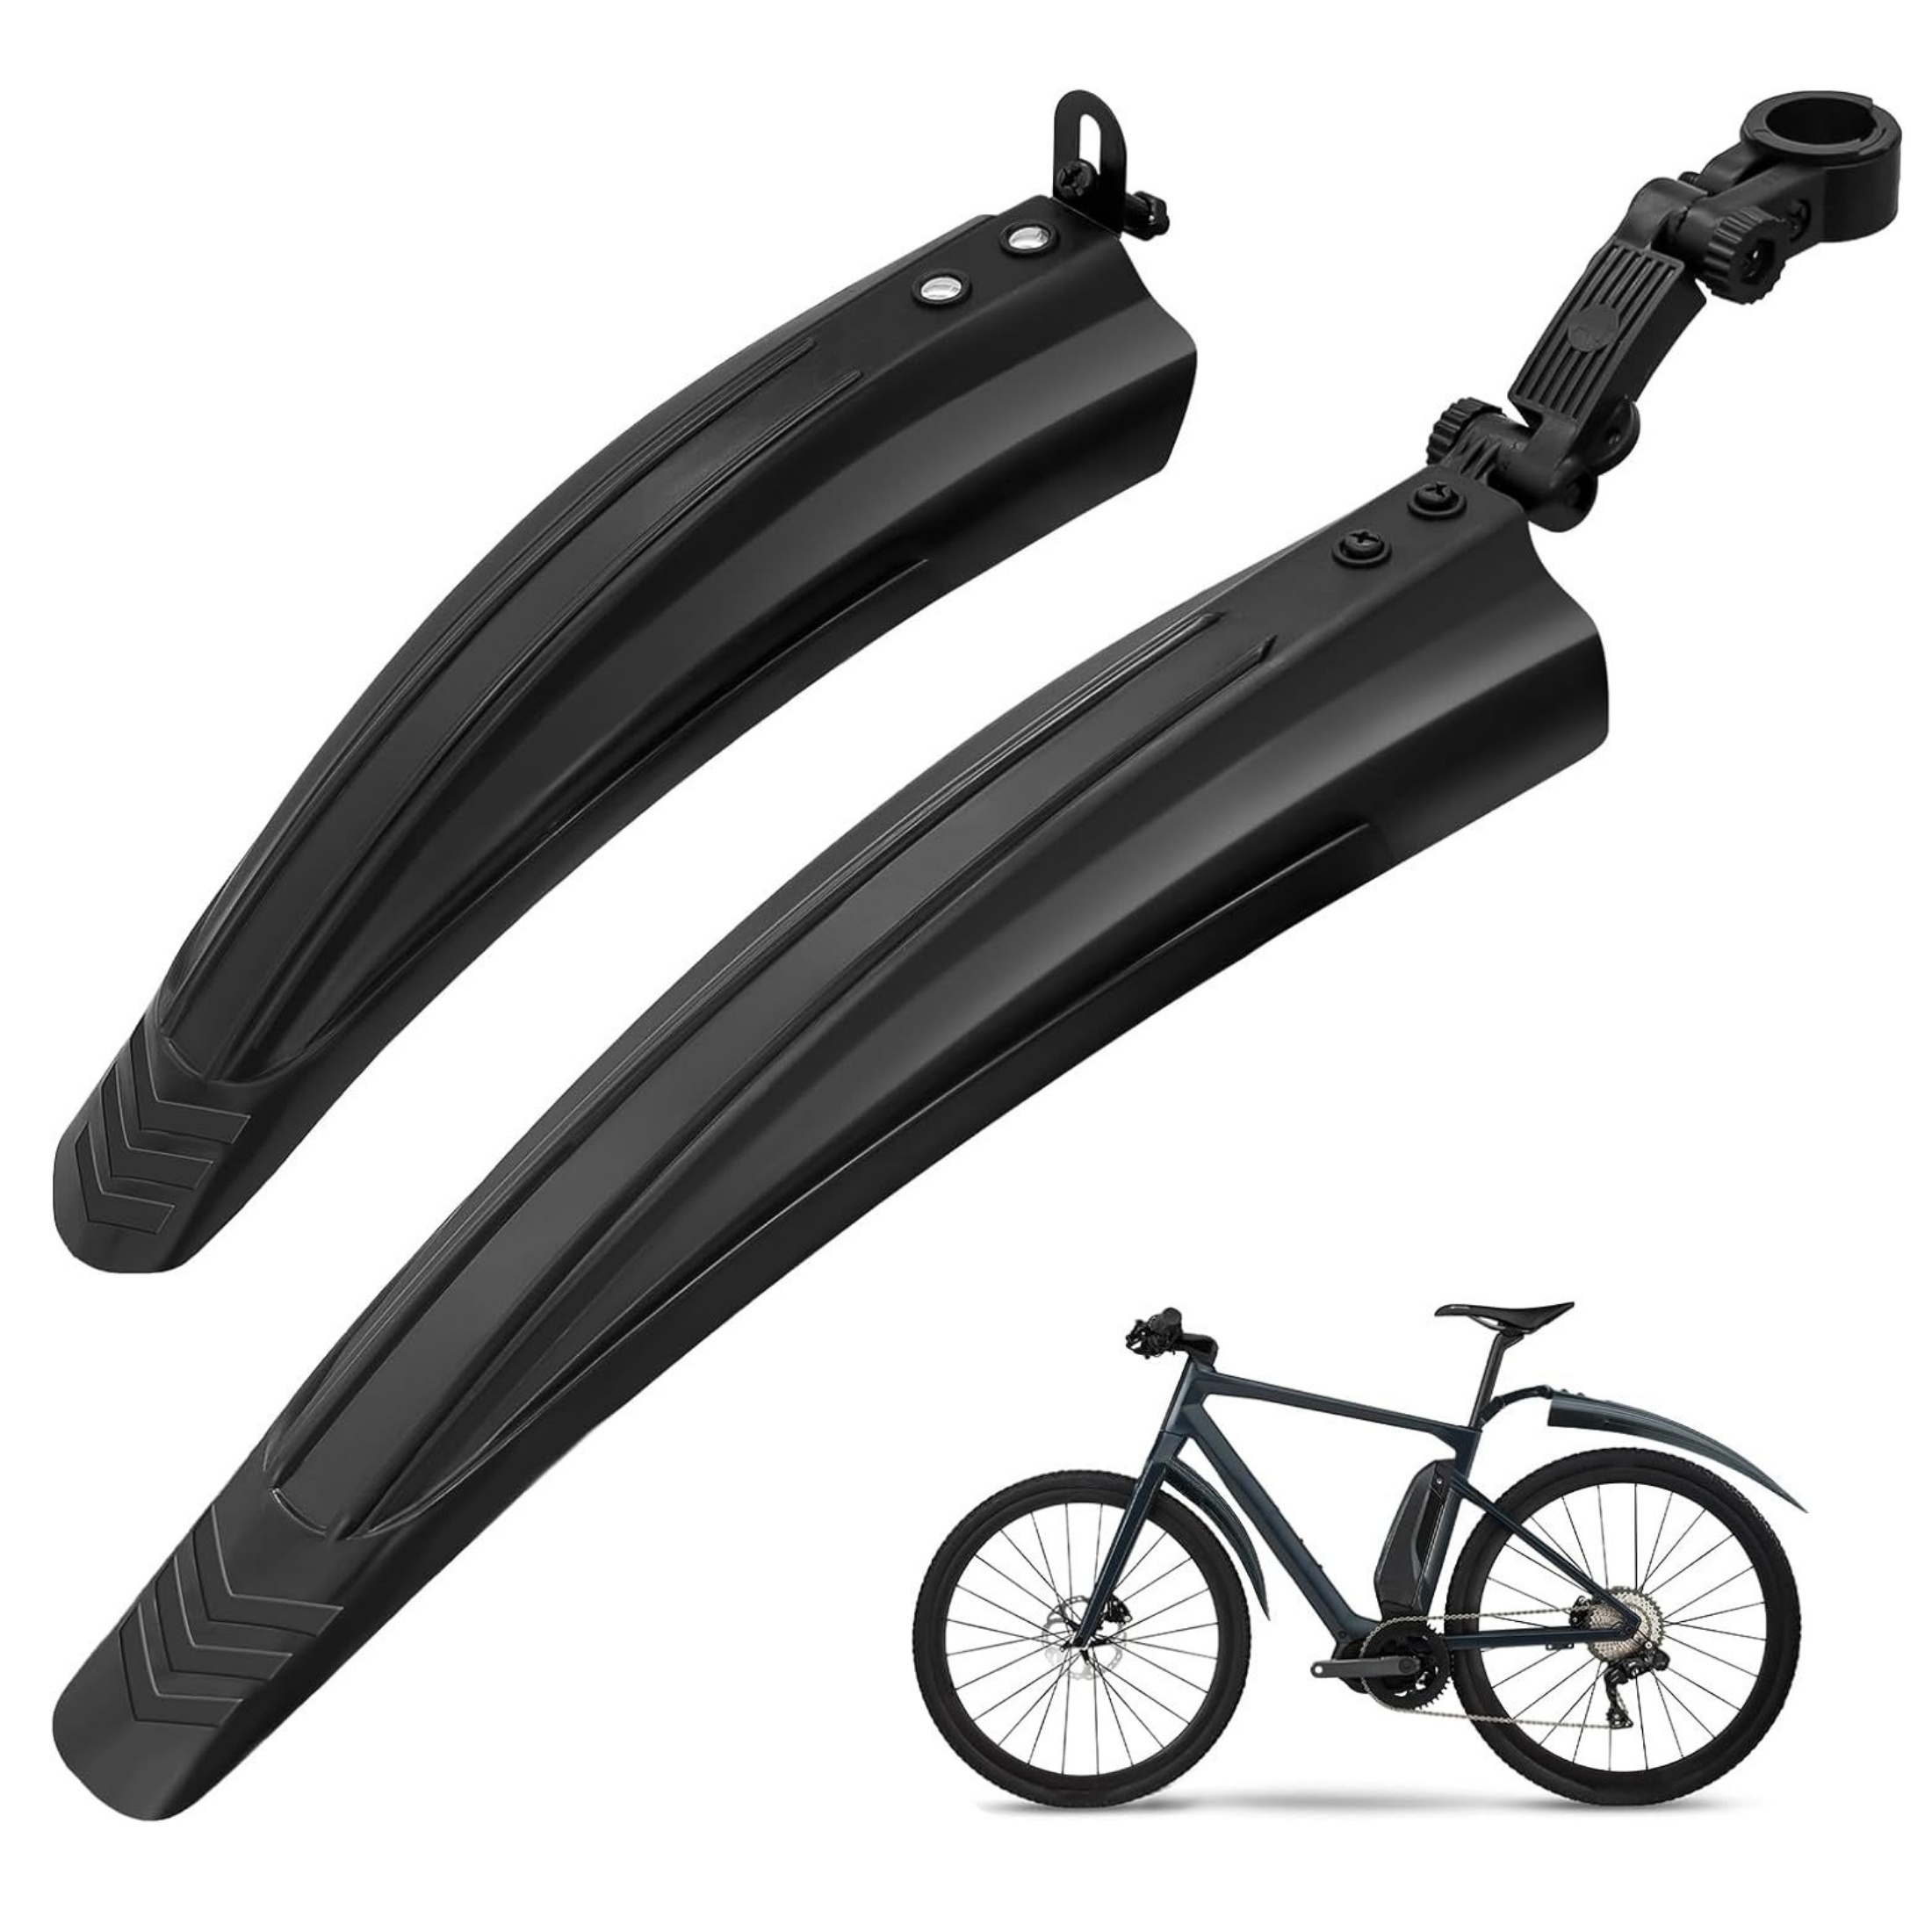 

2pcs Bike Mudguard Set, Portable Adjustable Road Mountain Bike Bicycle Cycling Tires Front And Rear Mud Guard Fenders For Mtb Mountain Road Bike